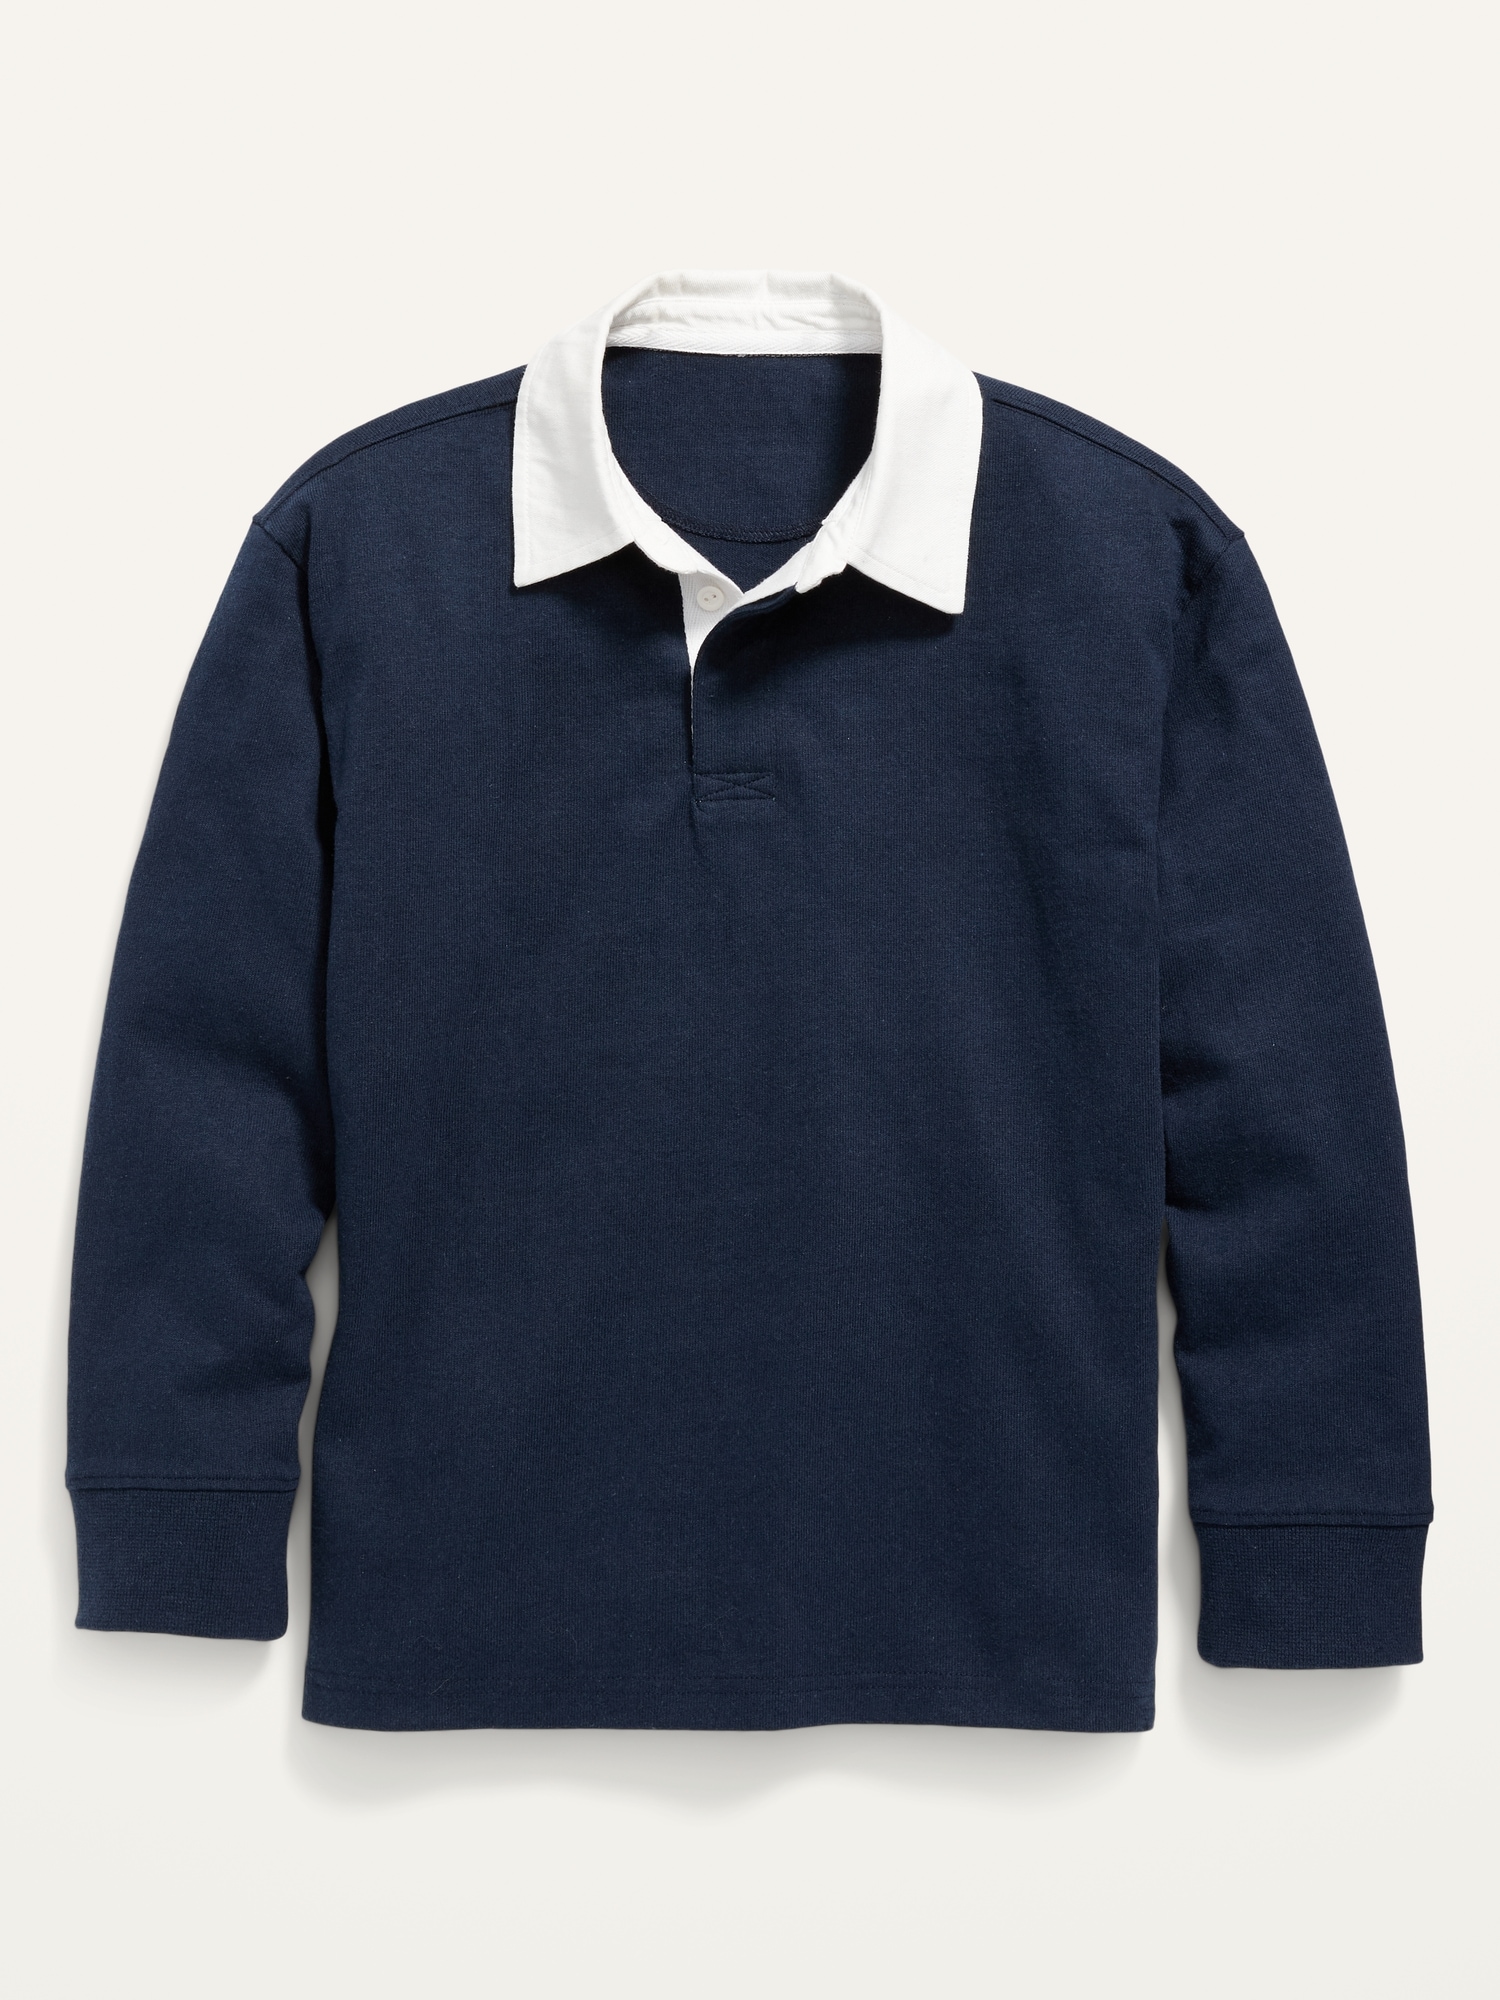 Long-Sleeve Rugby Polo Shirt for Boys | Old Navy